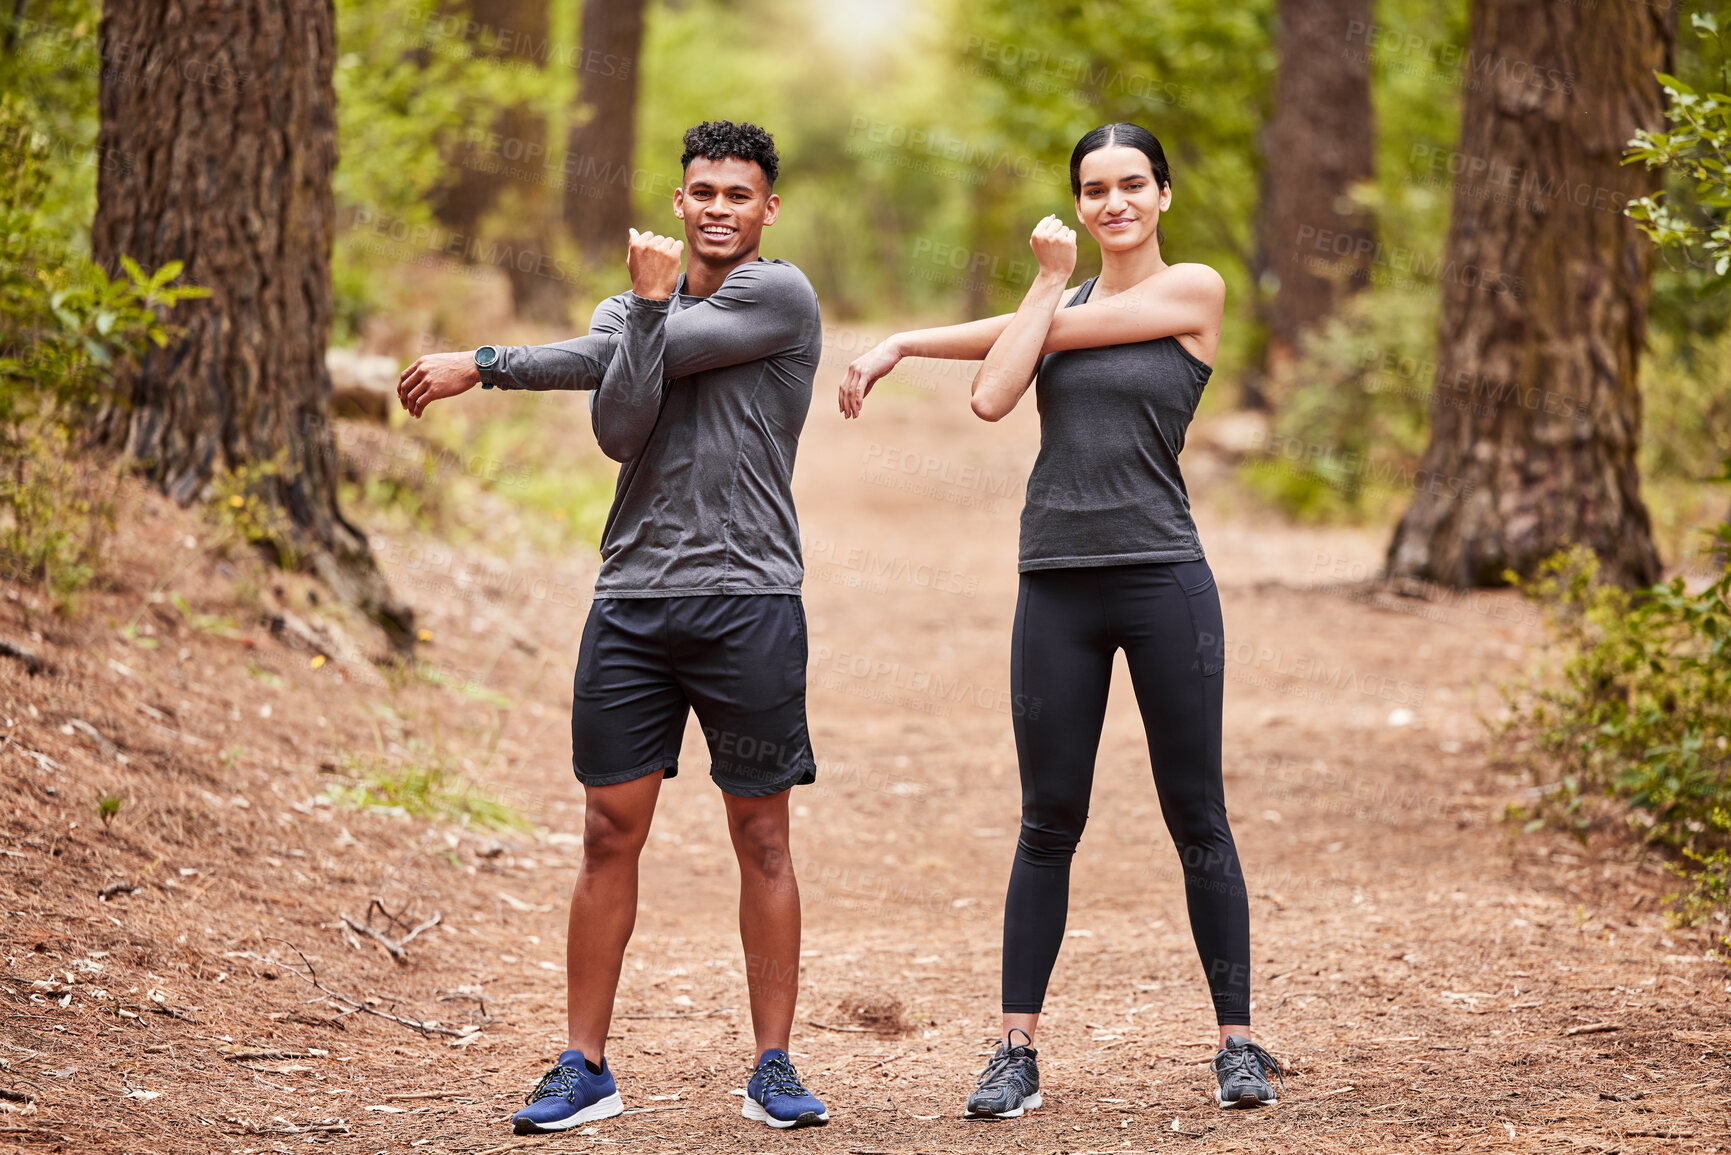 Buy stock photo Portrait of a happy young male and female athlete stretching their arms before a run outside in nature. Two fit sportspeople doing warm-up exercises in pine forest on a sunny day